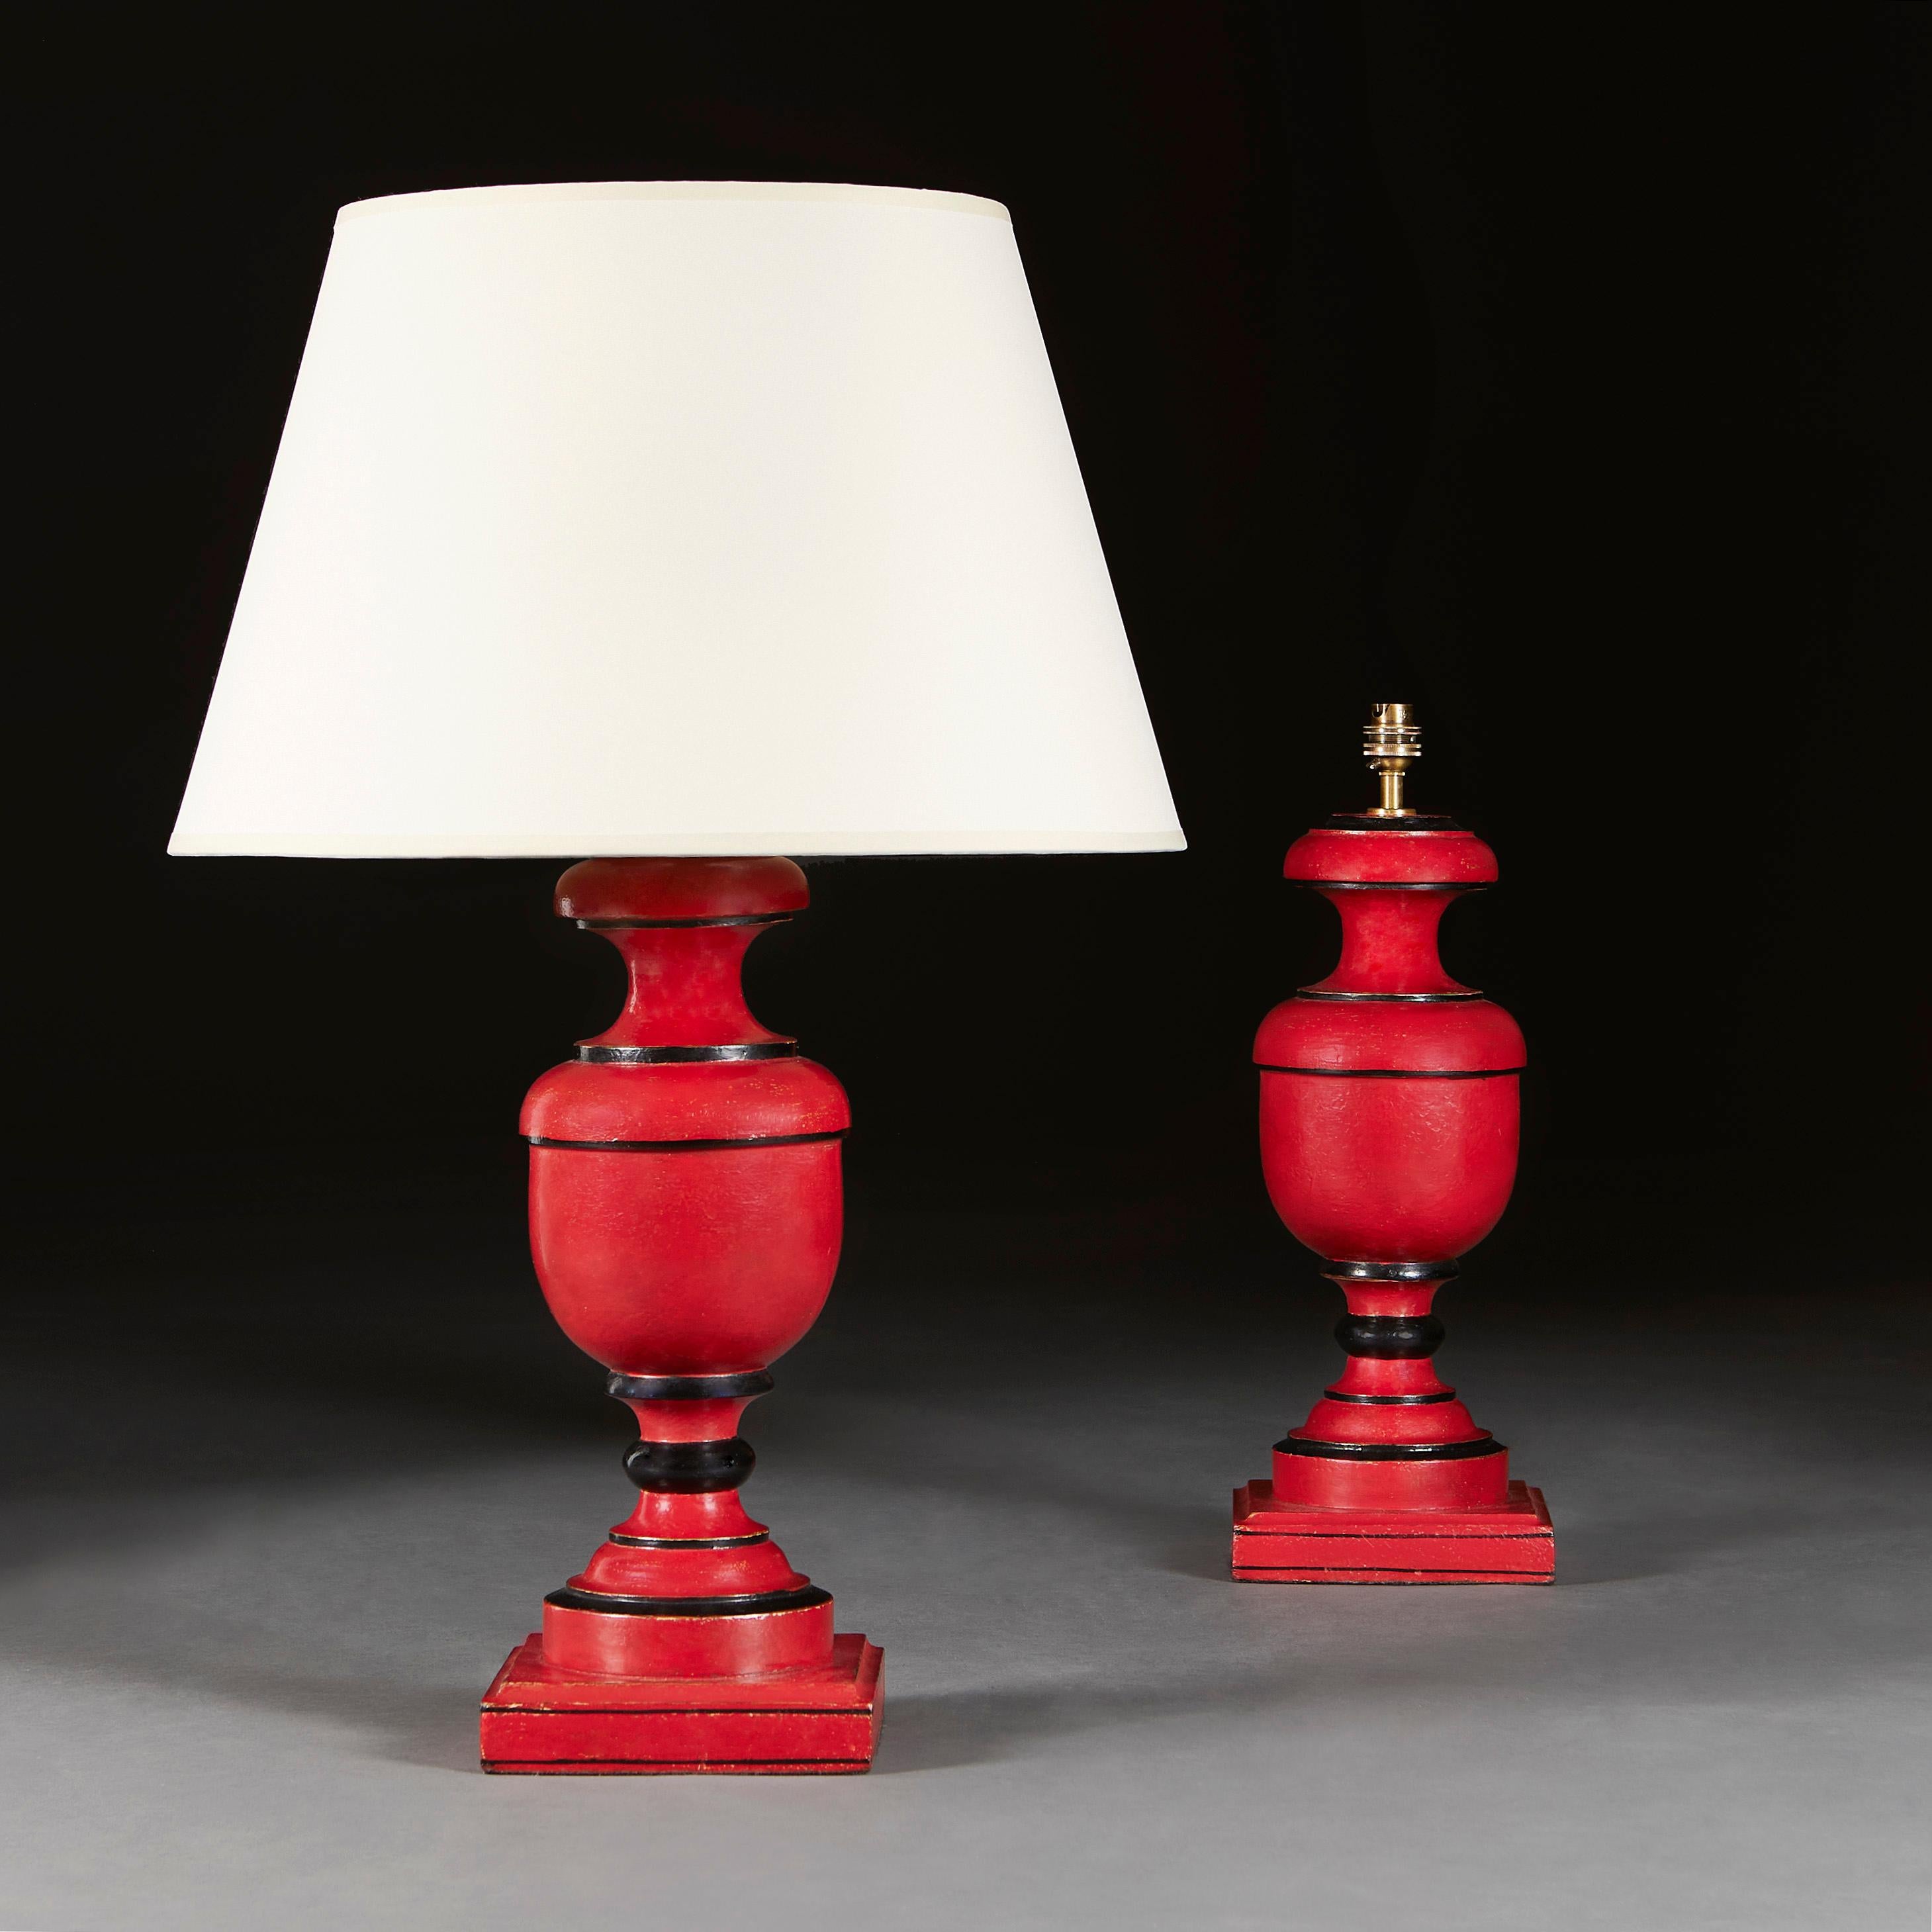 India, circa 1940

A pair of Anglo Indian baluster wood table lamps, with red paintwork with gold flecks and punctuated with black concentric bands.

Measures: Height of lamp 41.00cm
Height with shade 70.00cm
Width of base 17.00cm.

Please note: